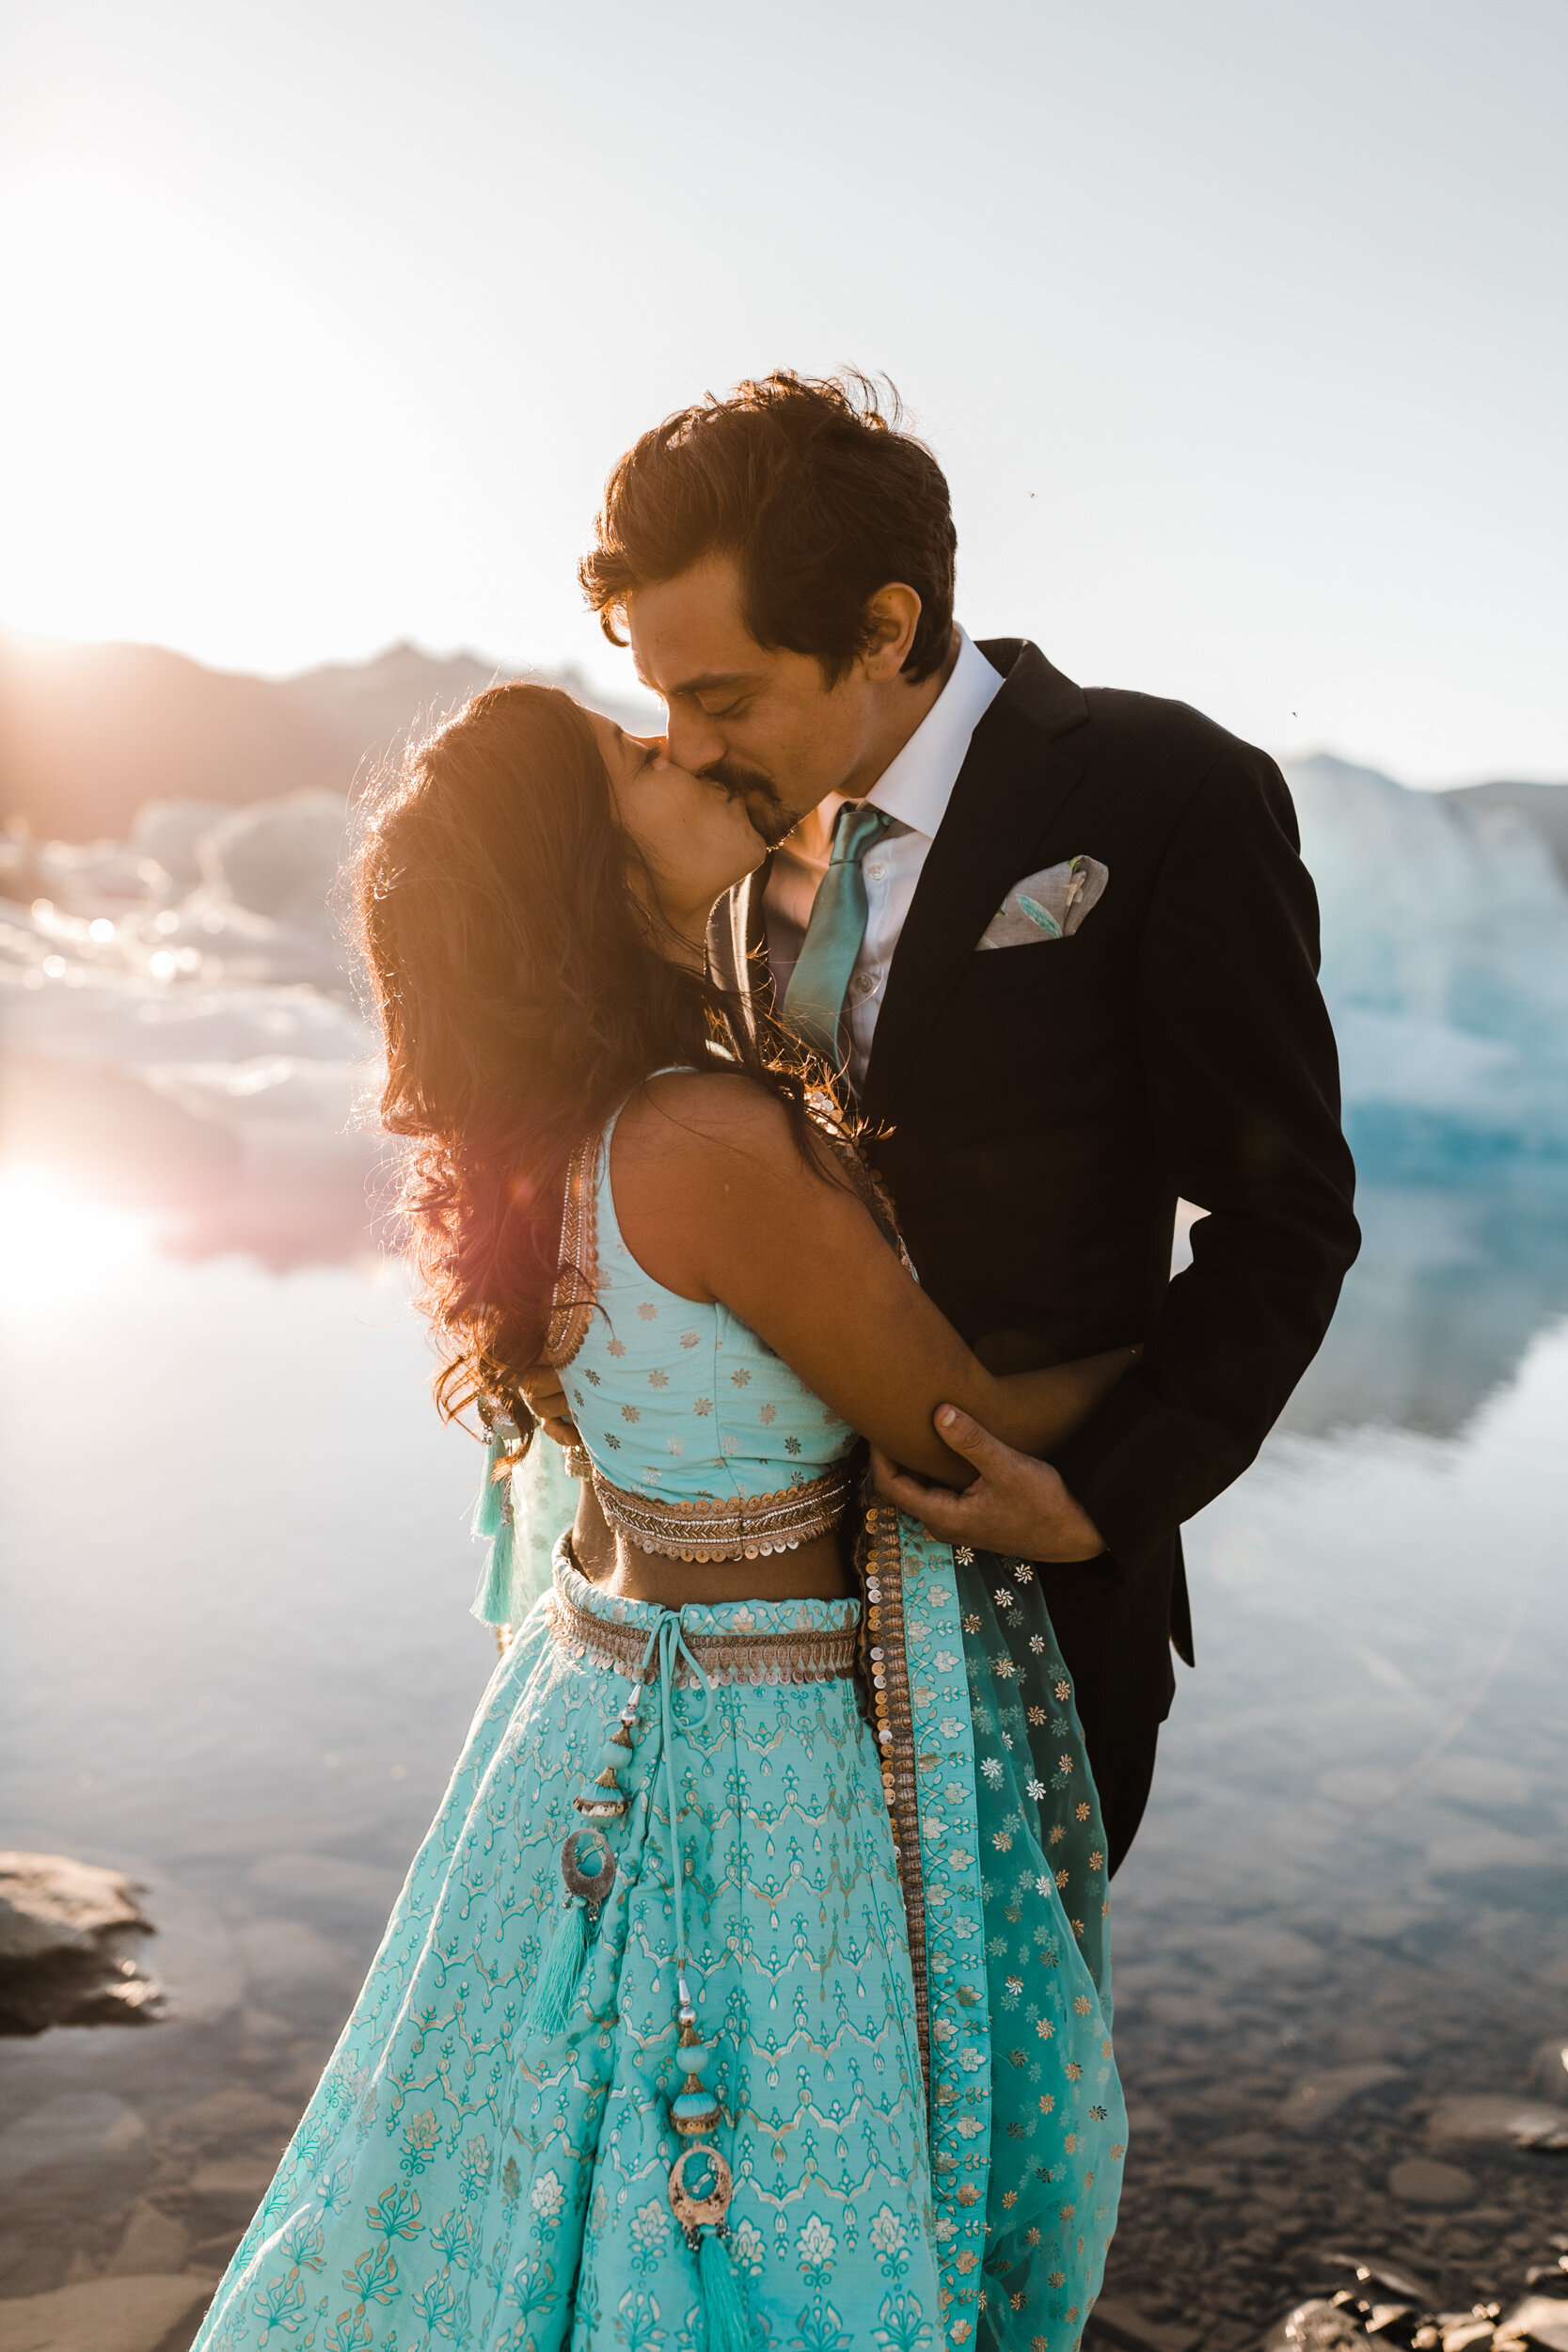 Helicopter Packrafting Elopement in Alaska | Indian Wedding Dress | Adventure Wedding with a dog | The Hearnes